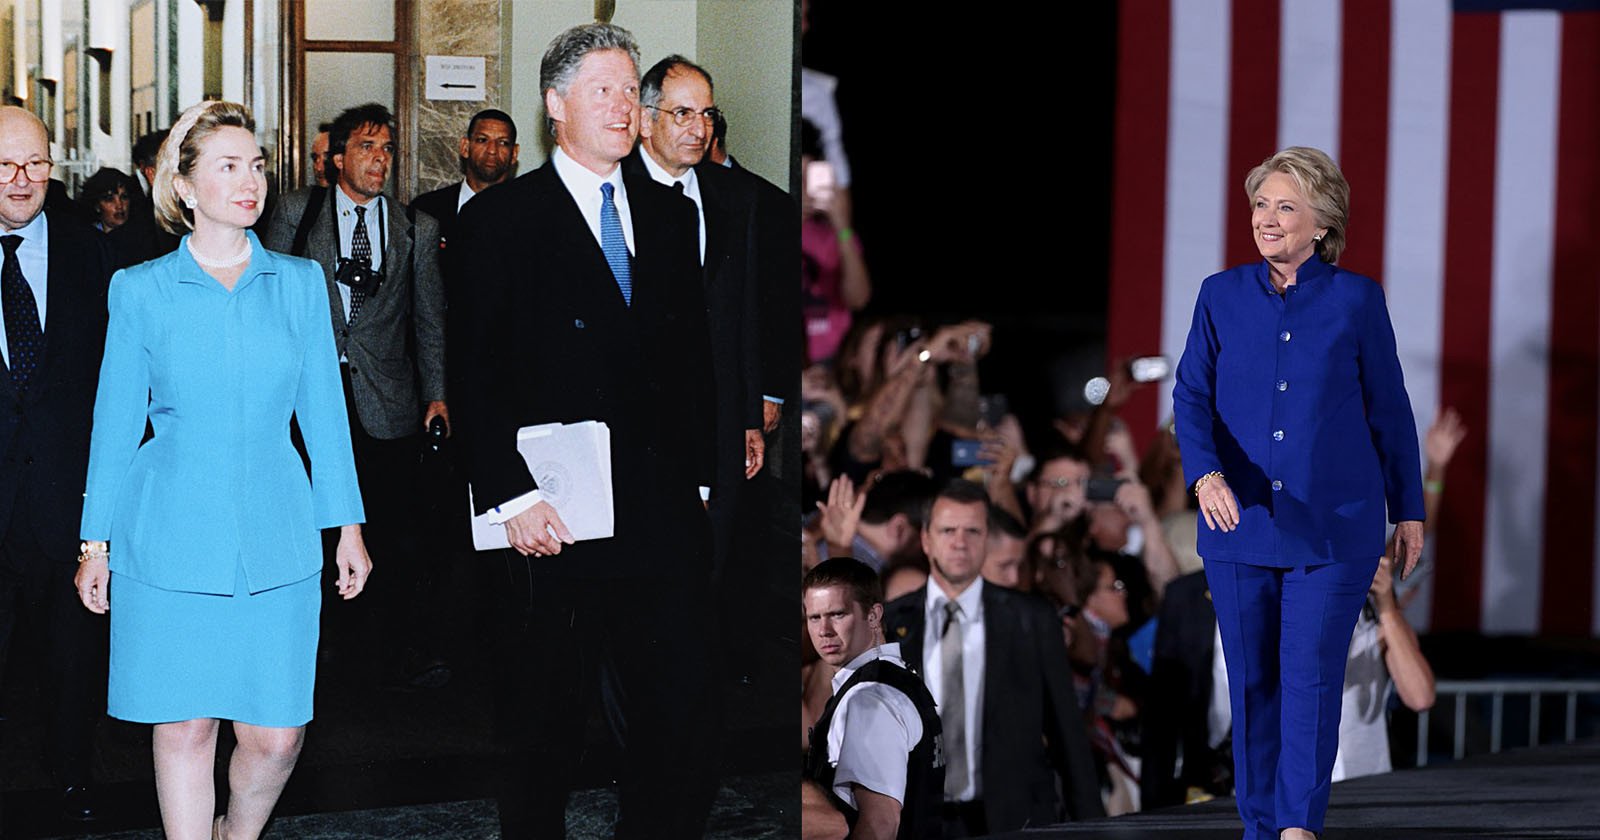  hillary clinton switched pantsuits after suggestive upskirt photos 